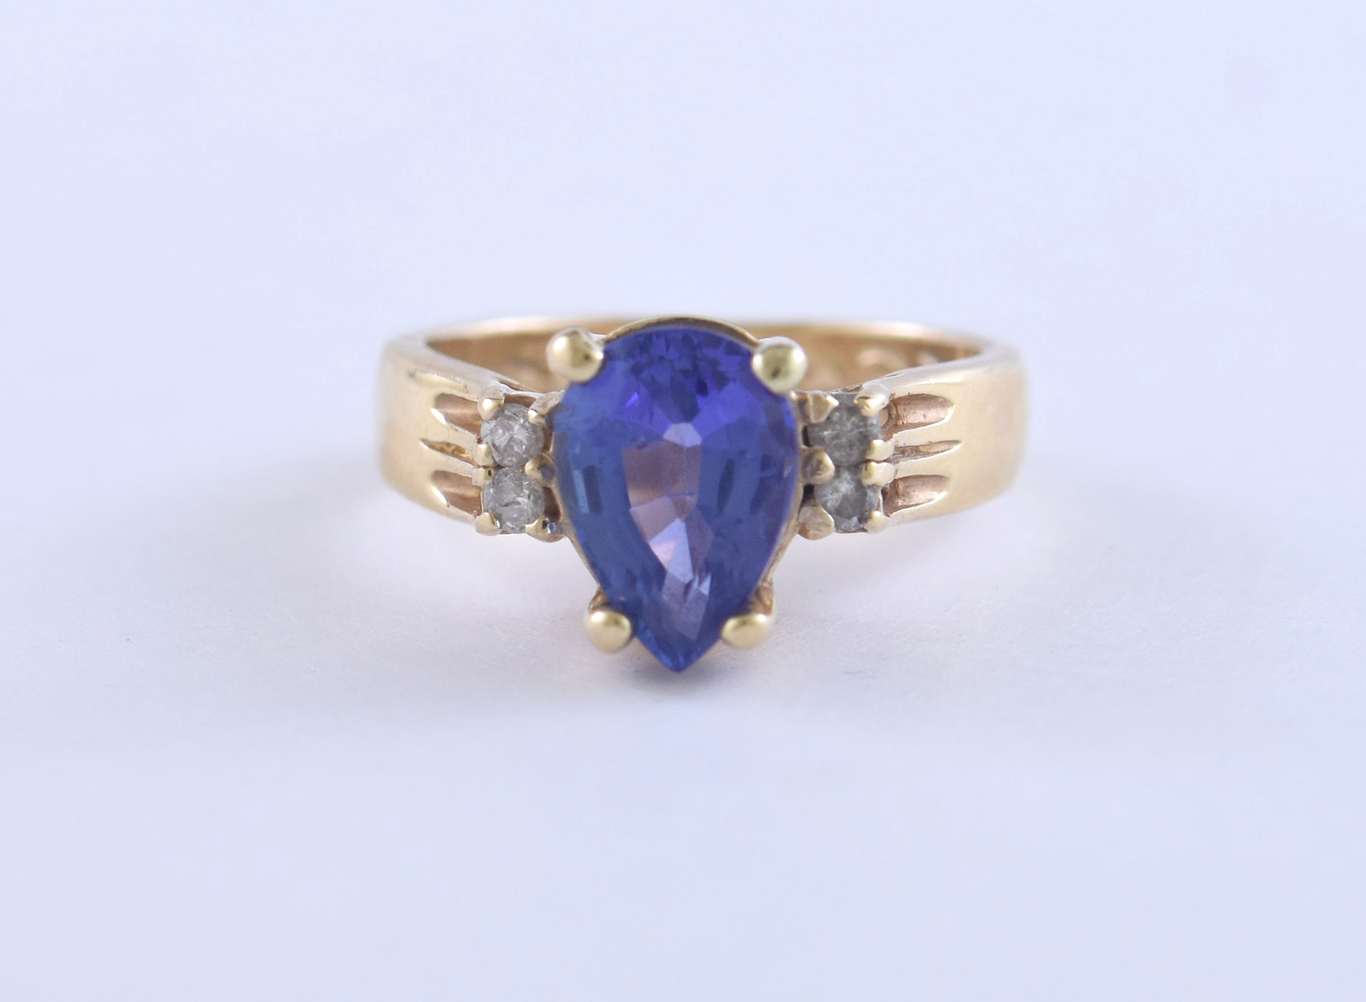 Pear shaped tanzanite and diamond ring set in 14k yellow gold